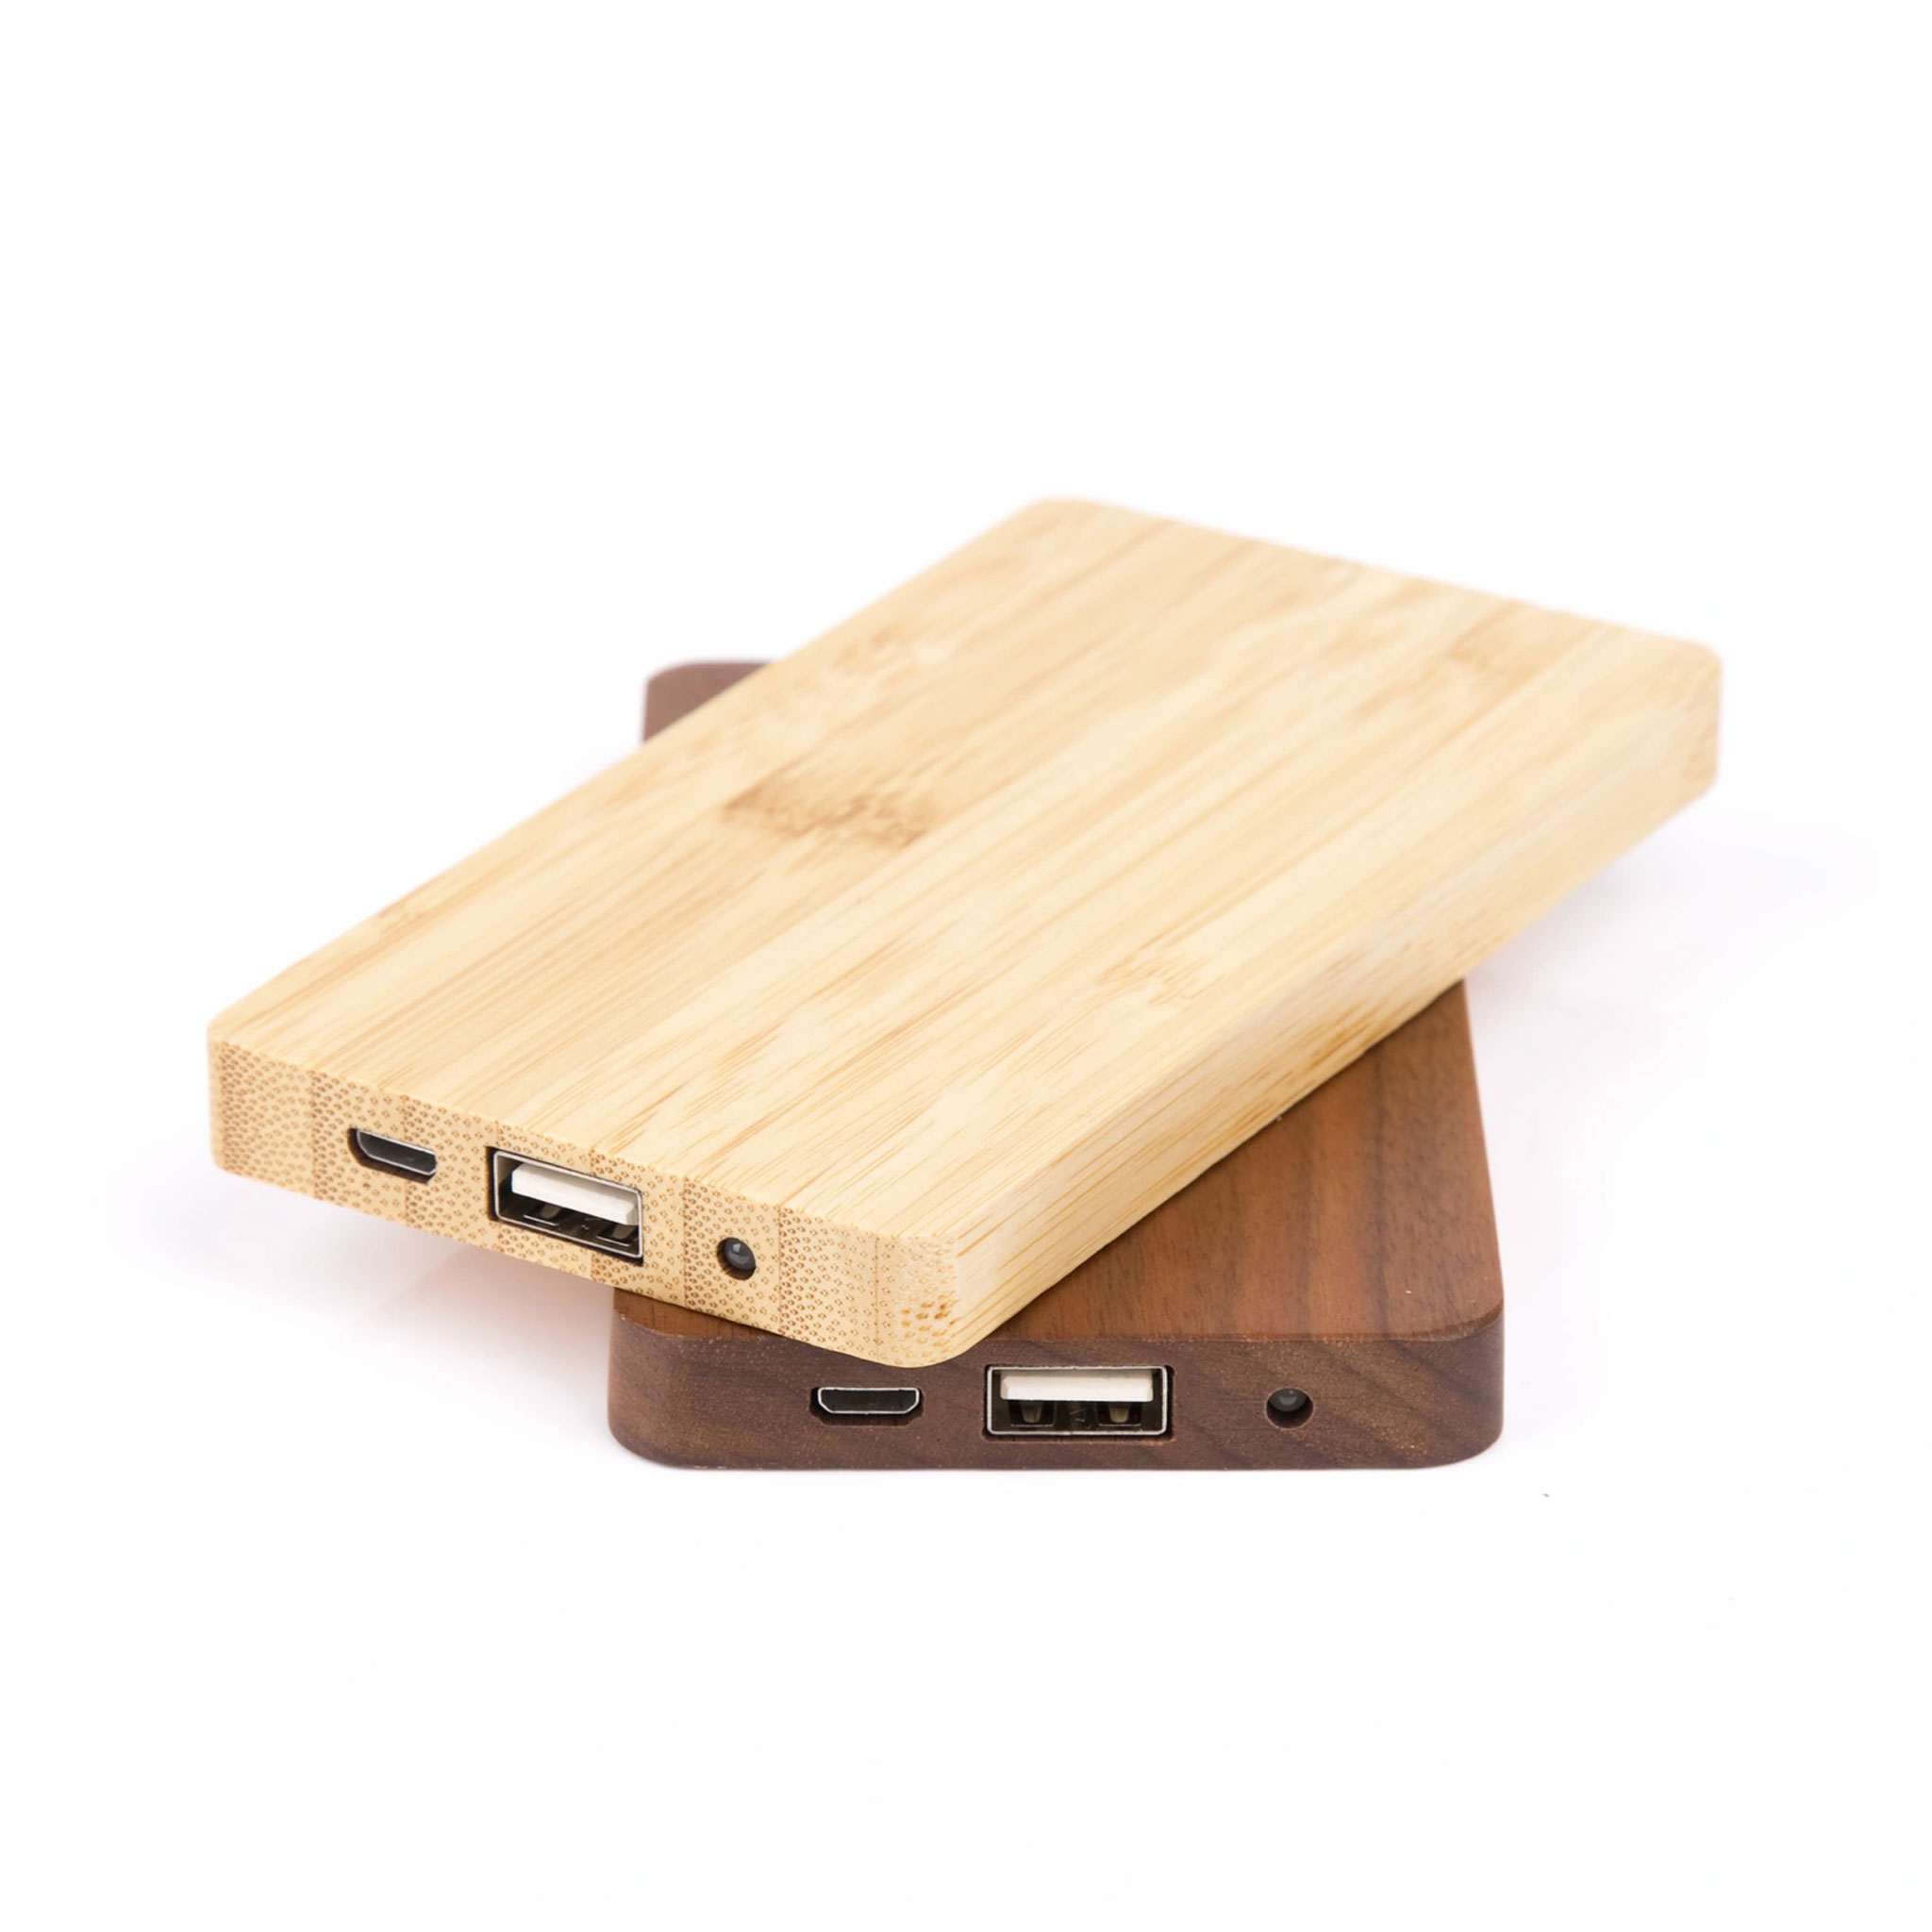 Sustainable wood panel powerbank perfect for all technology and nature lovers made from an elegant combination of aluminium and real wood